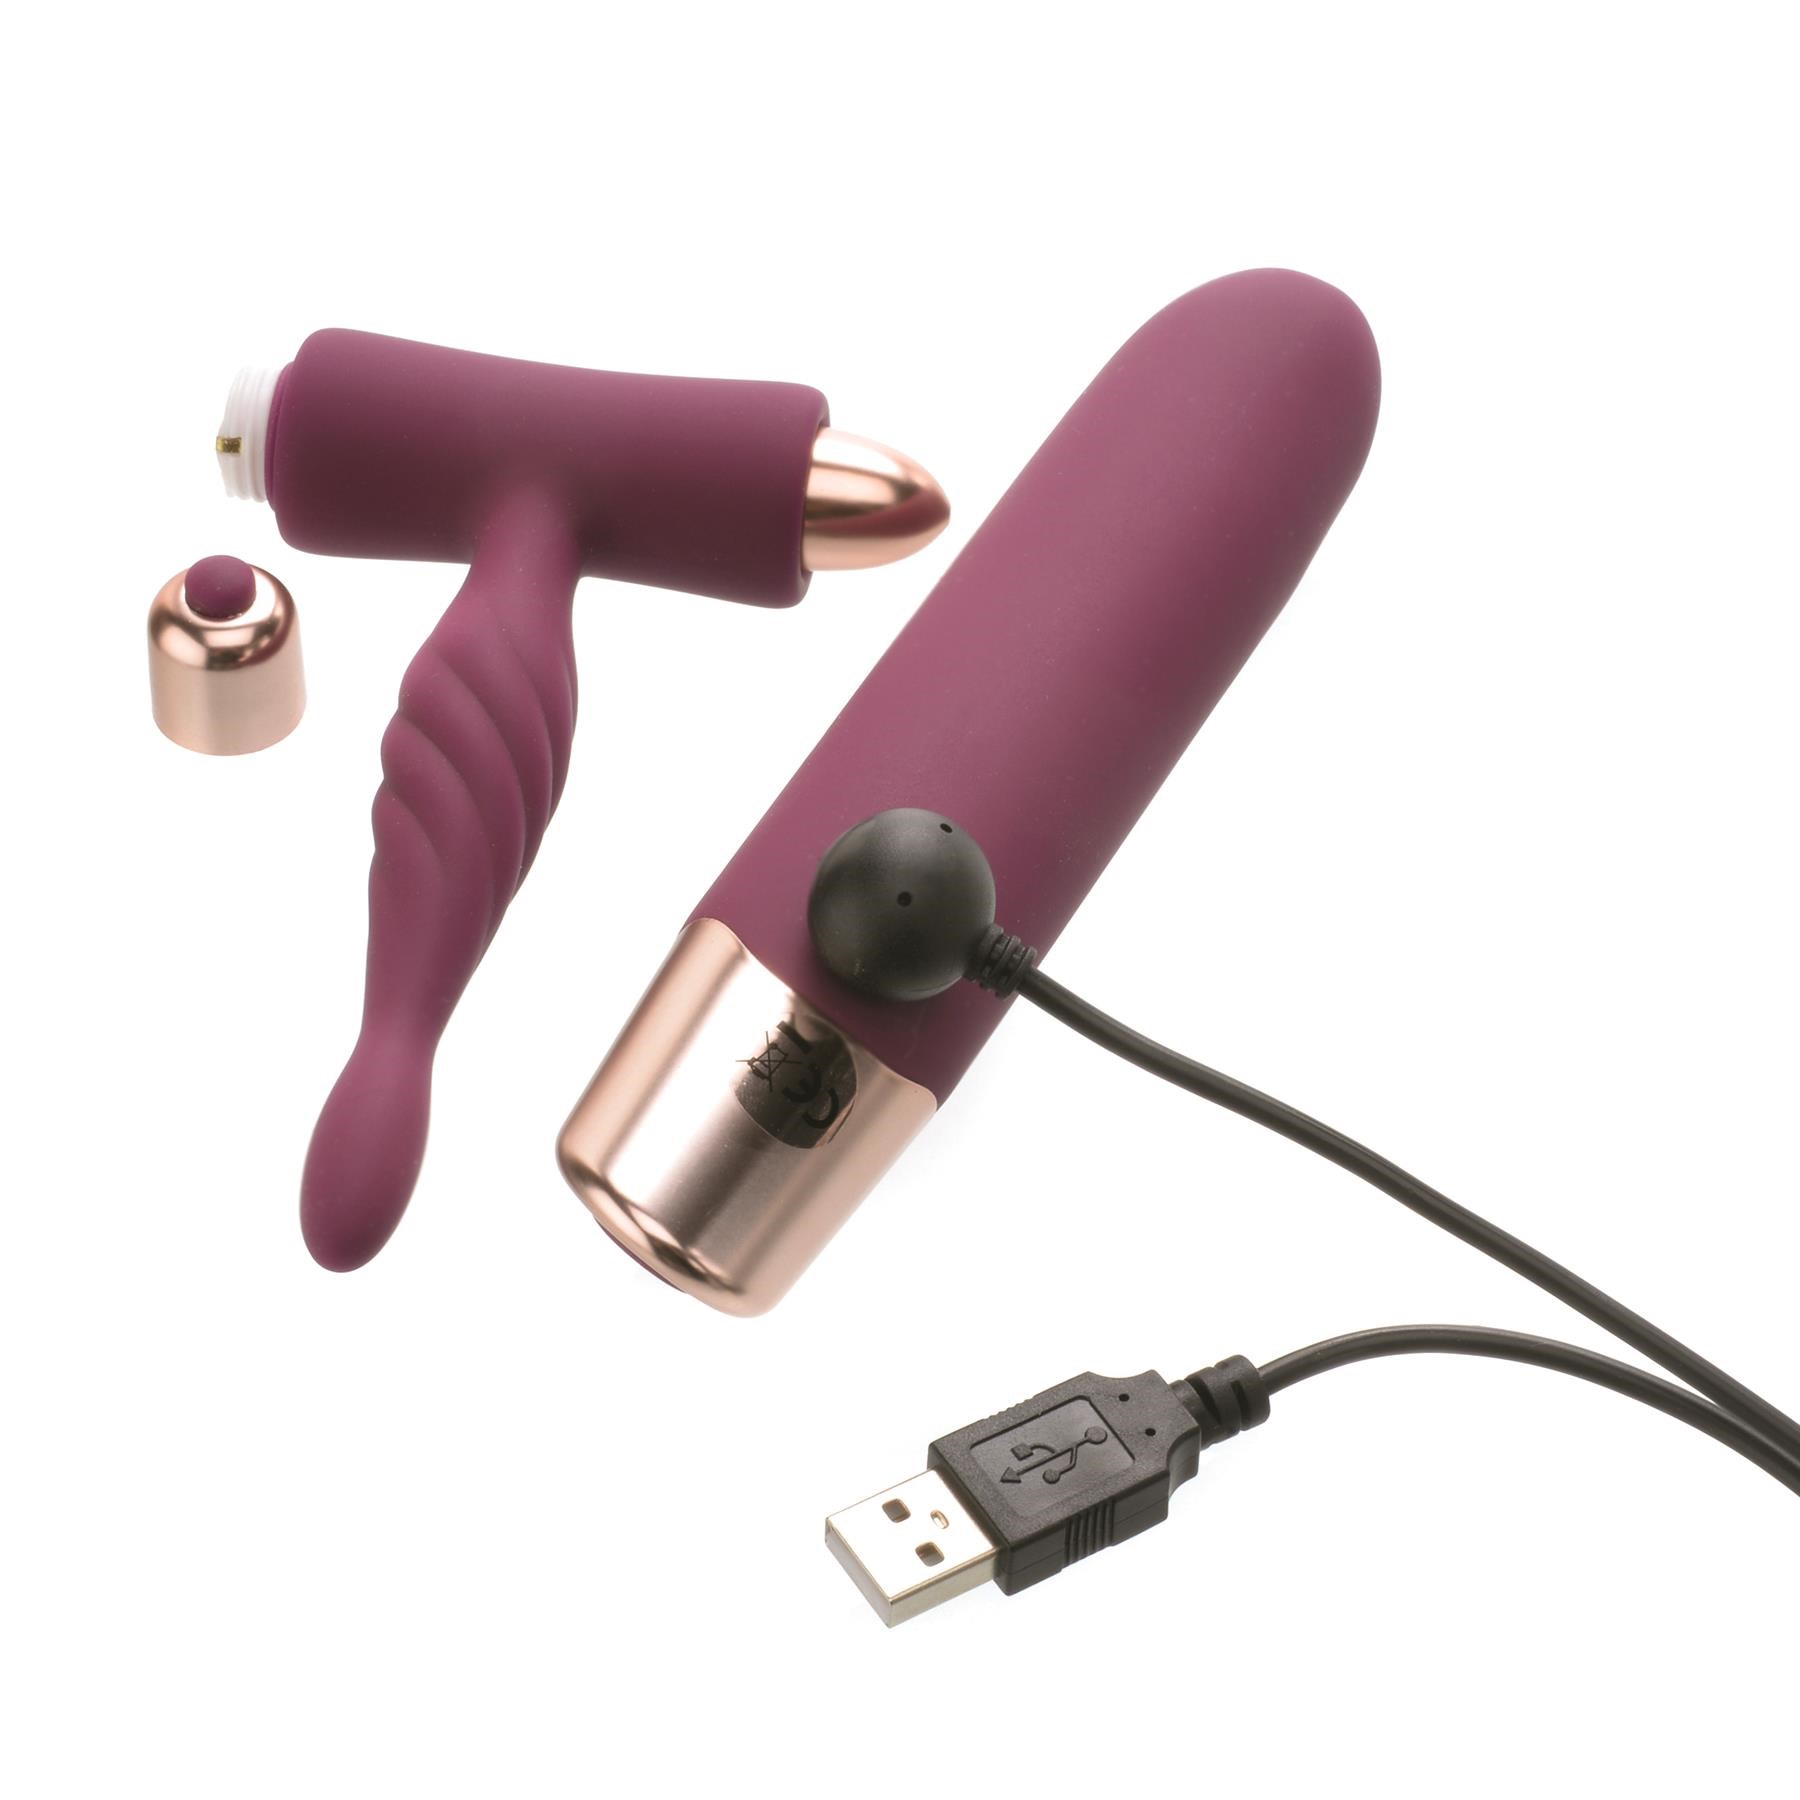 Climaximum Rapture Couples Vibrator Kit Showing Where Charger and Batteries Are Placed